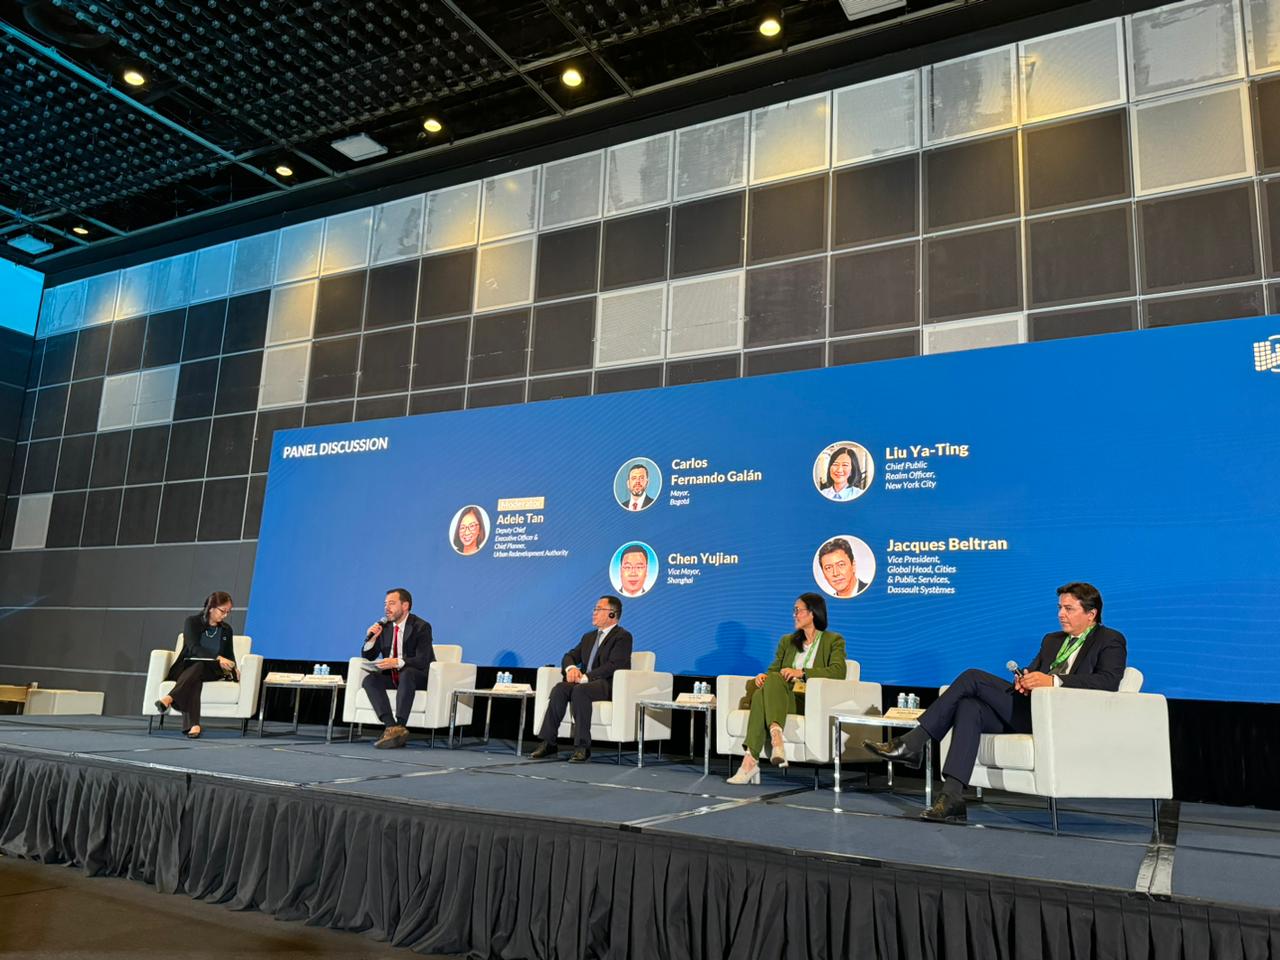 Mayor Carlos F. Galán Attends World Cities Summit in Singapore